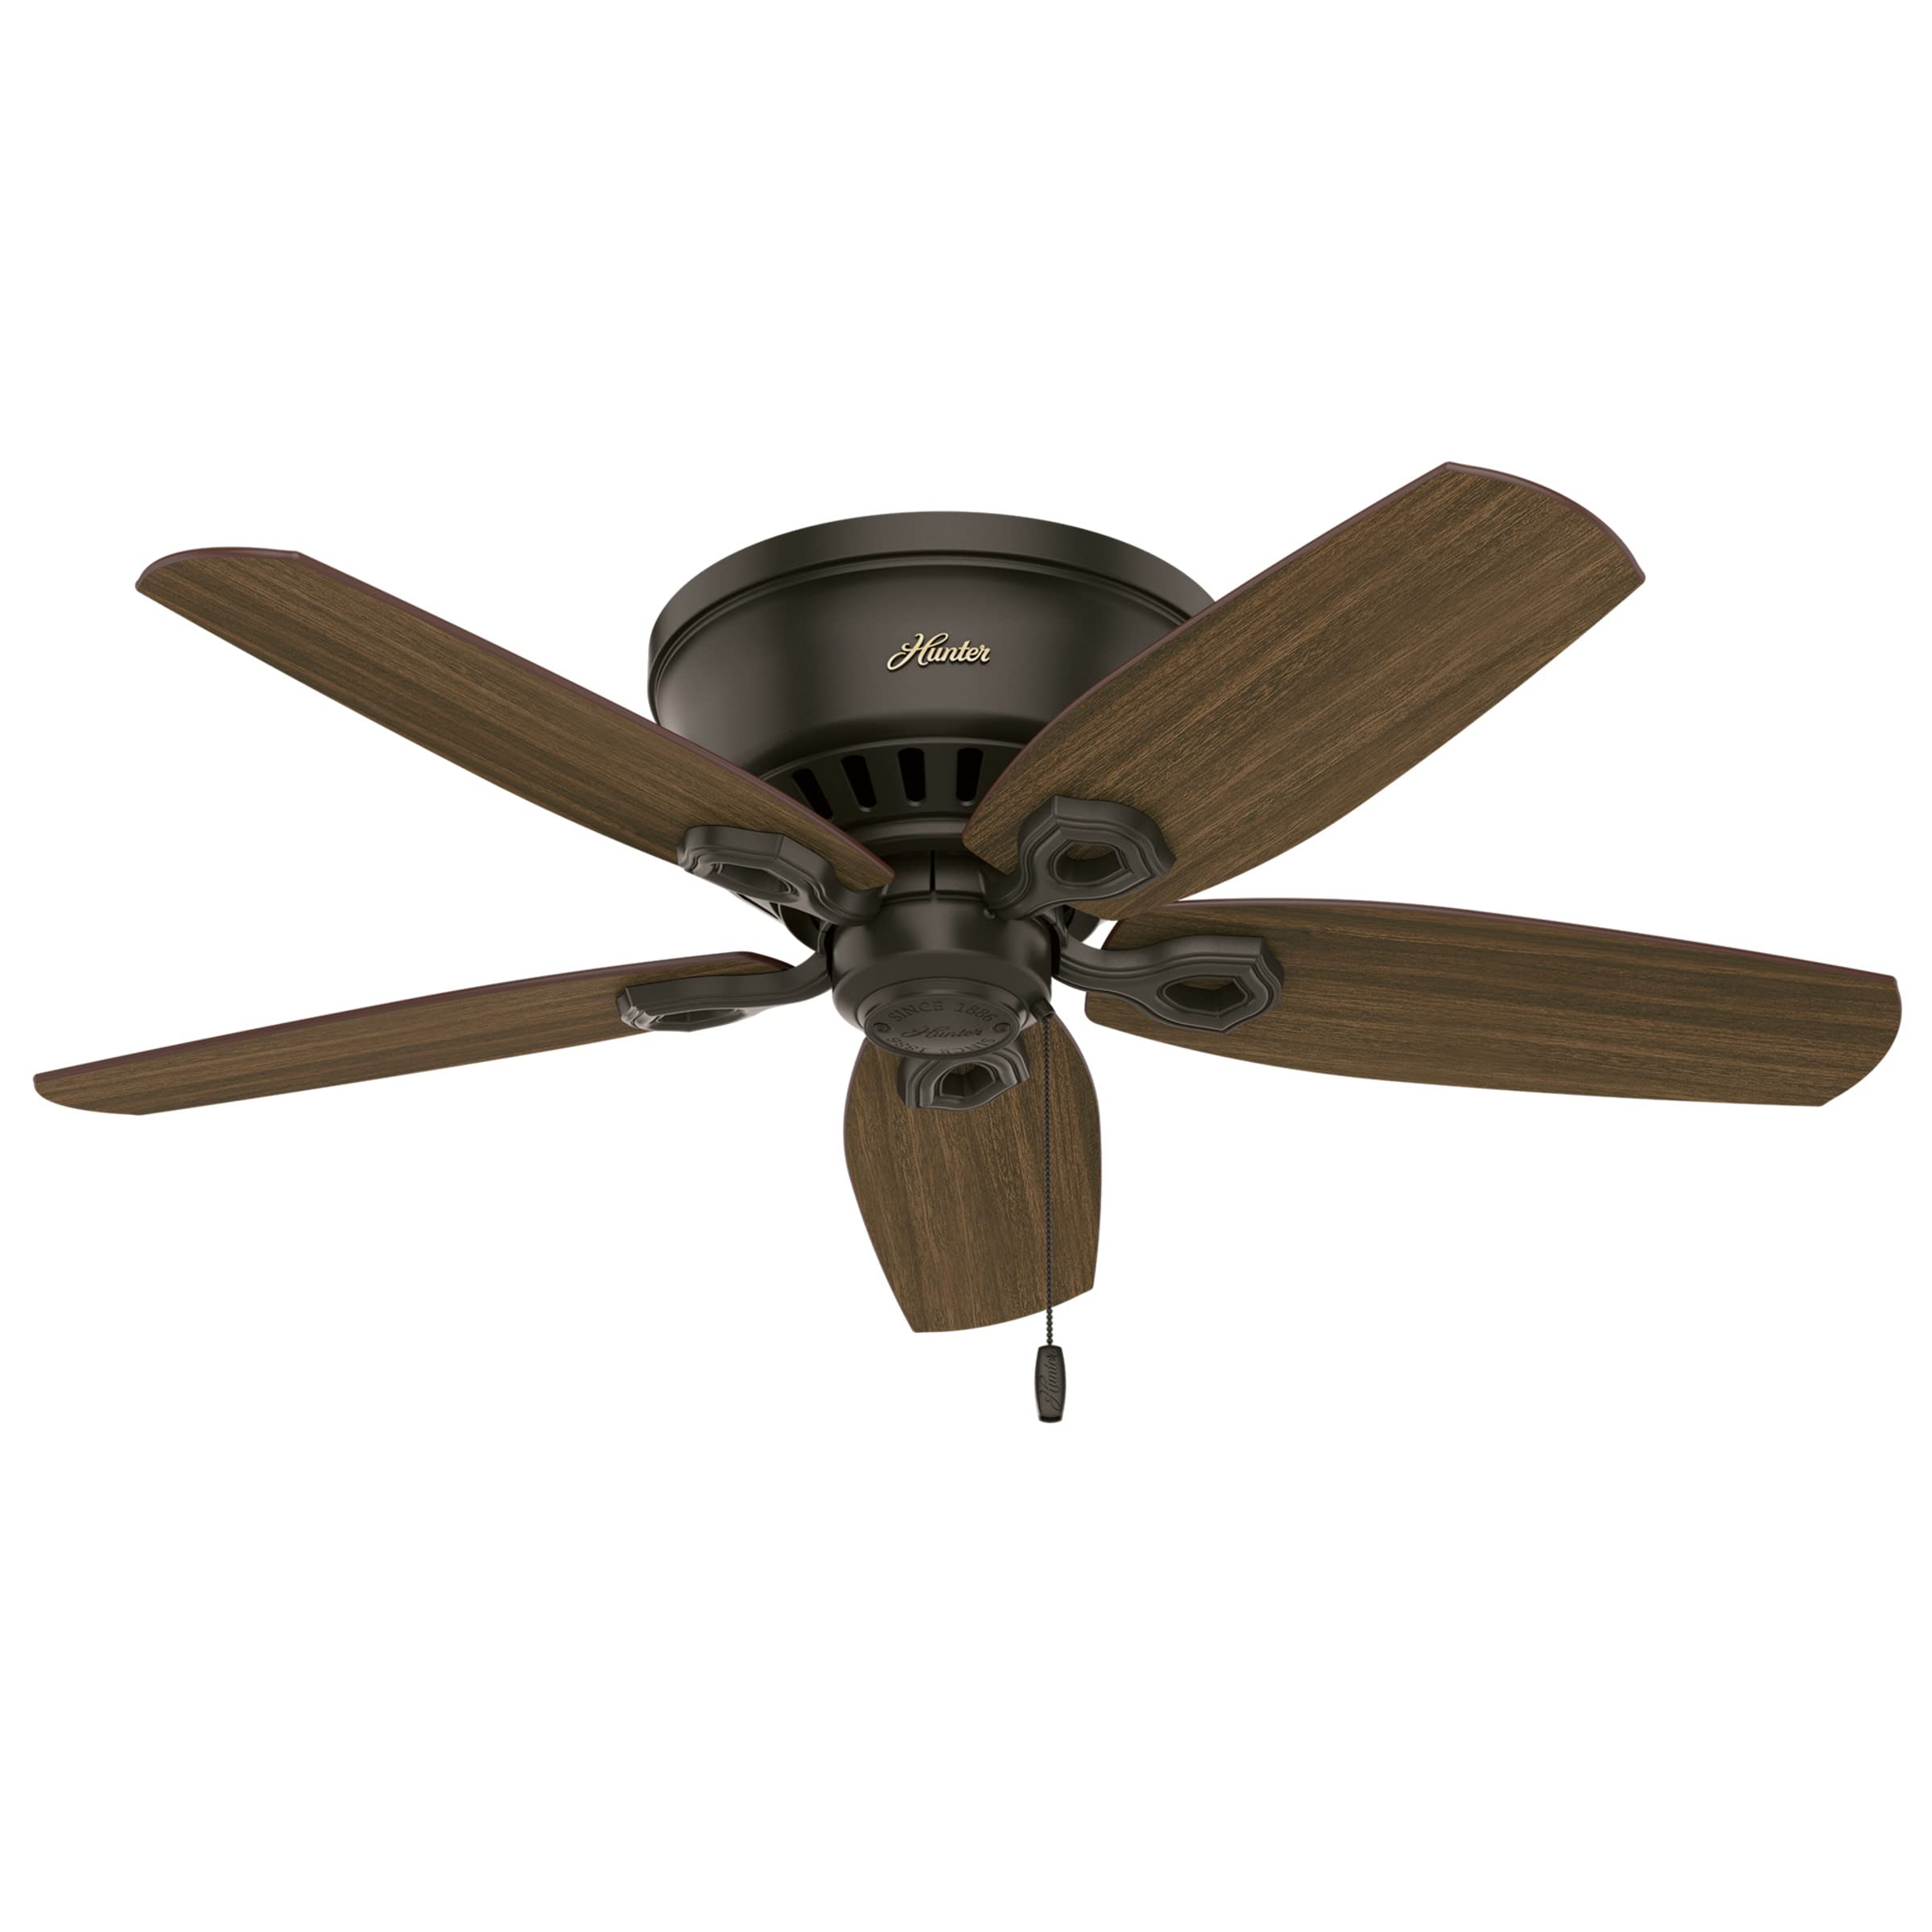 Hunter Fan Company, 51091, 42 inch Builder New Bronze Low Profile Ceiling Fan with LED Light Kit and Pull Chain